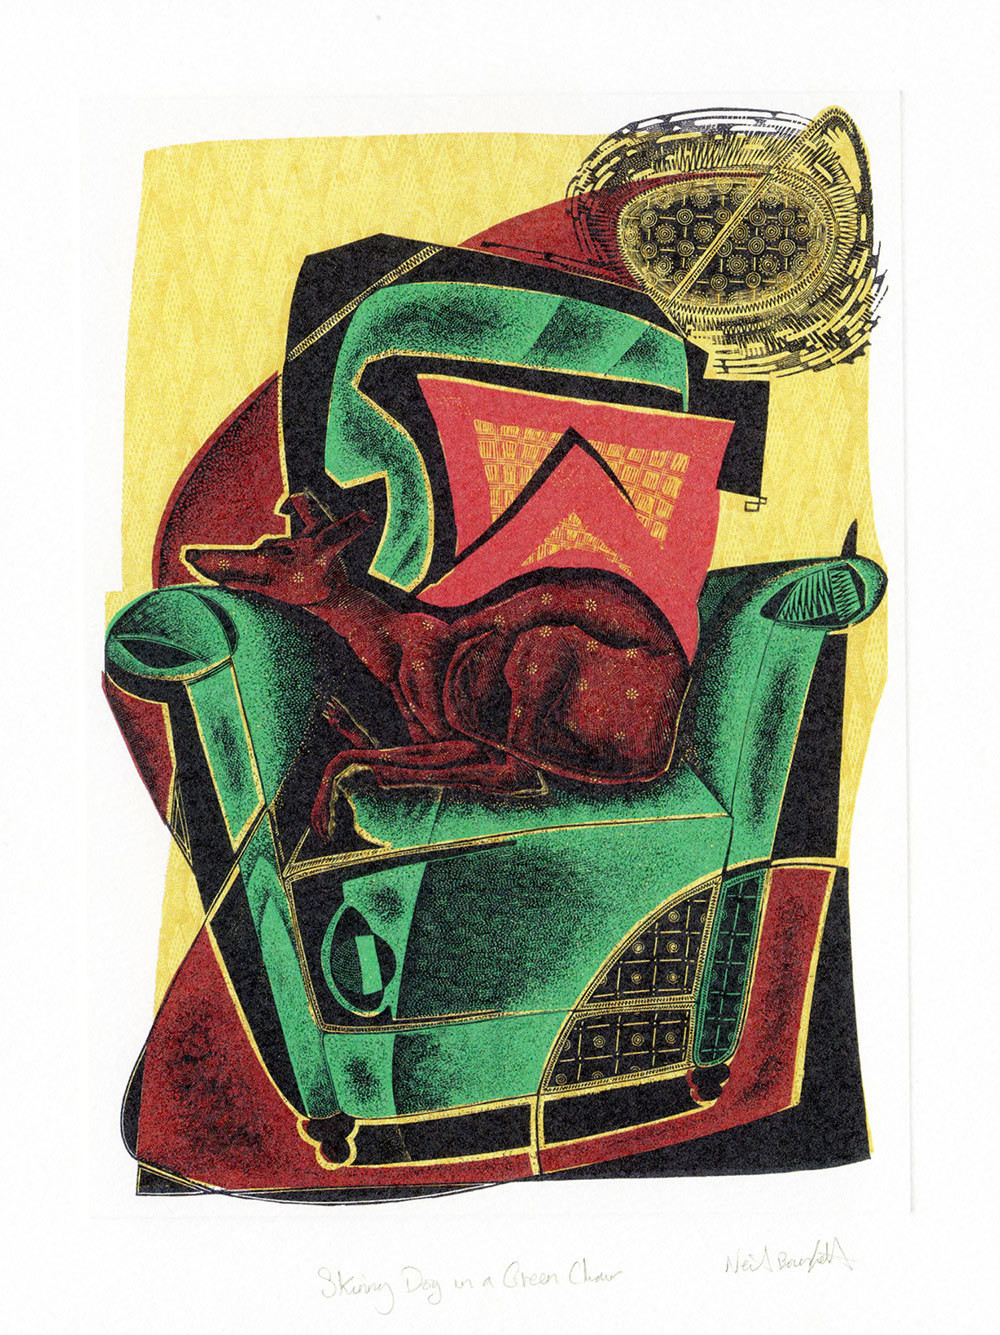 Skinny Dog on a Green Chair- Printmakers Card